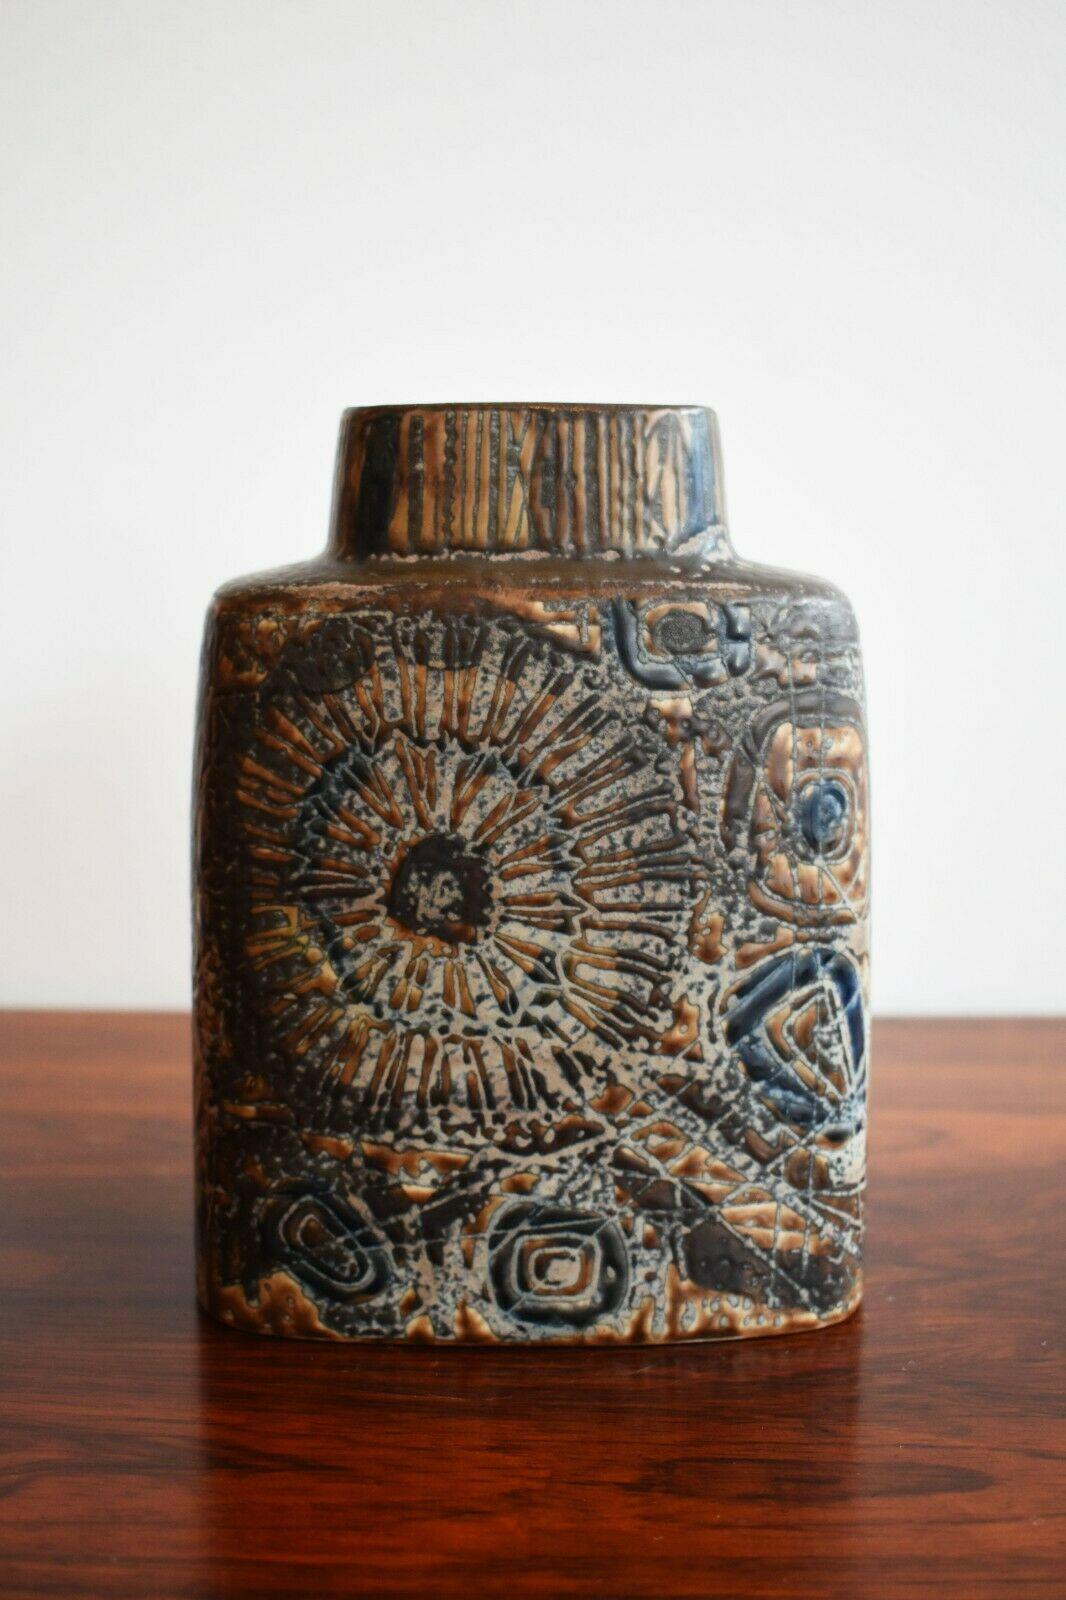 Copenhagen Pottery ceramic vase with beautiful and intricate textural detailing. 

The pot boasts a range of earthy tones, which are accentuated by the grooves and textures within the pot itself.